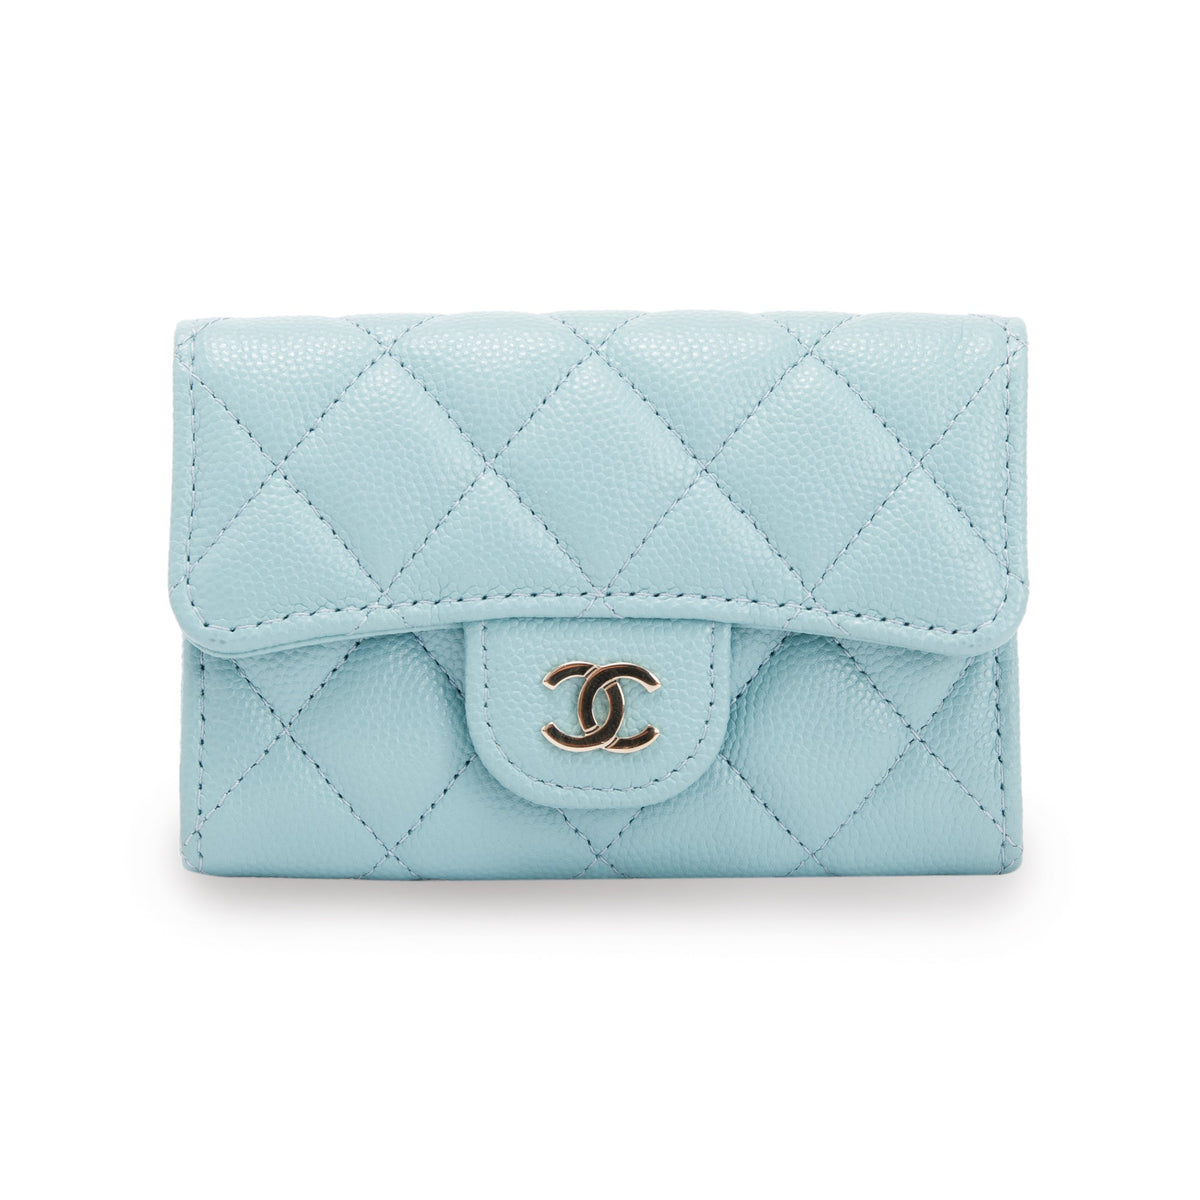 Buy Chanel Blue Caviar Classic Flap Card Holder w/ Box Chanel with